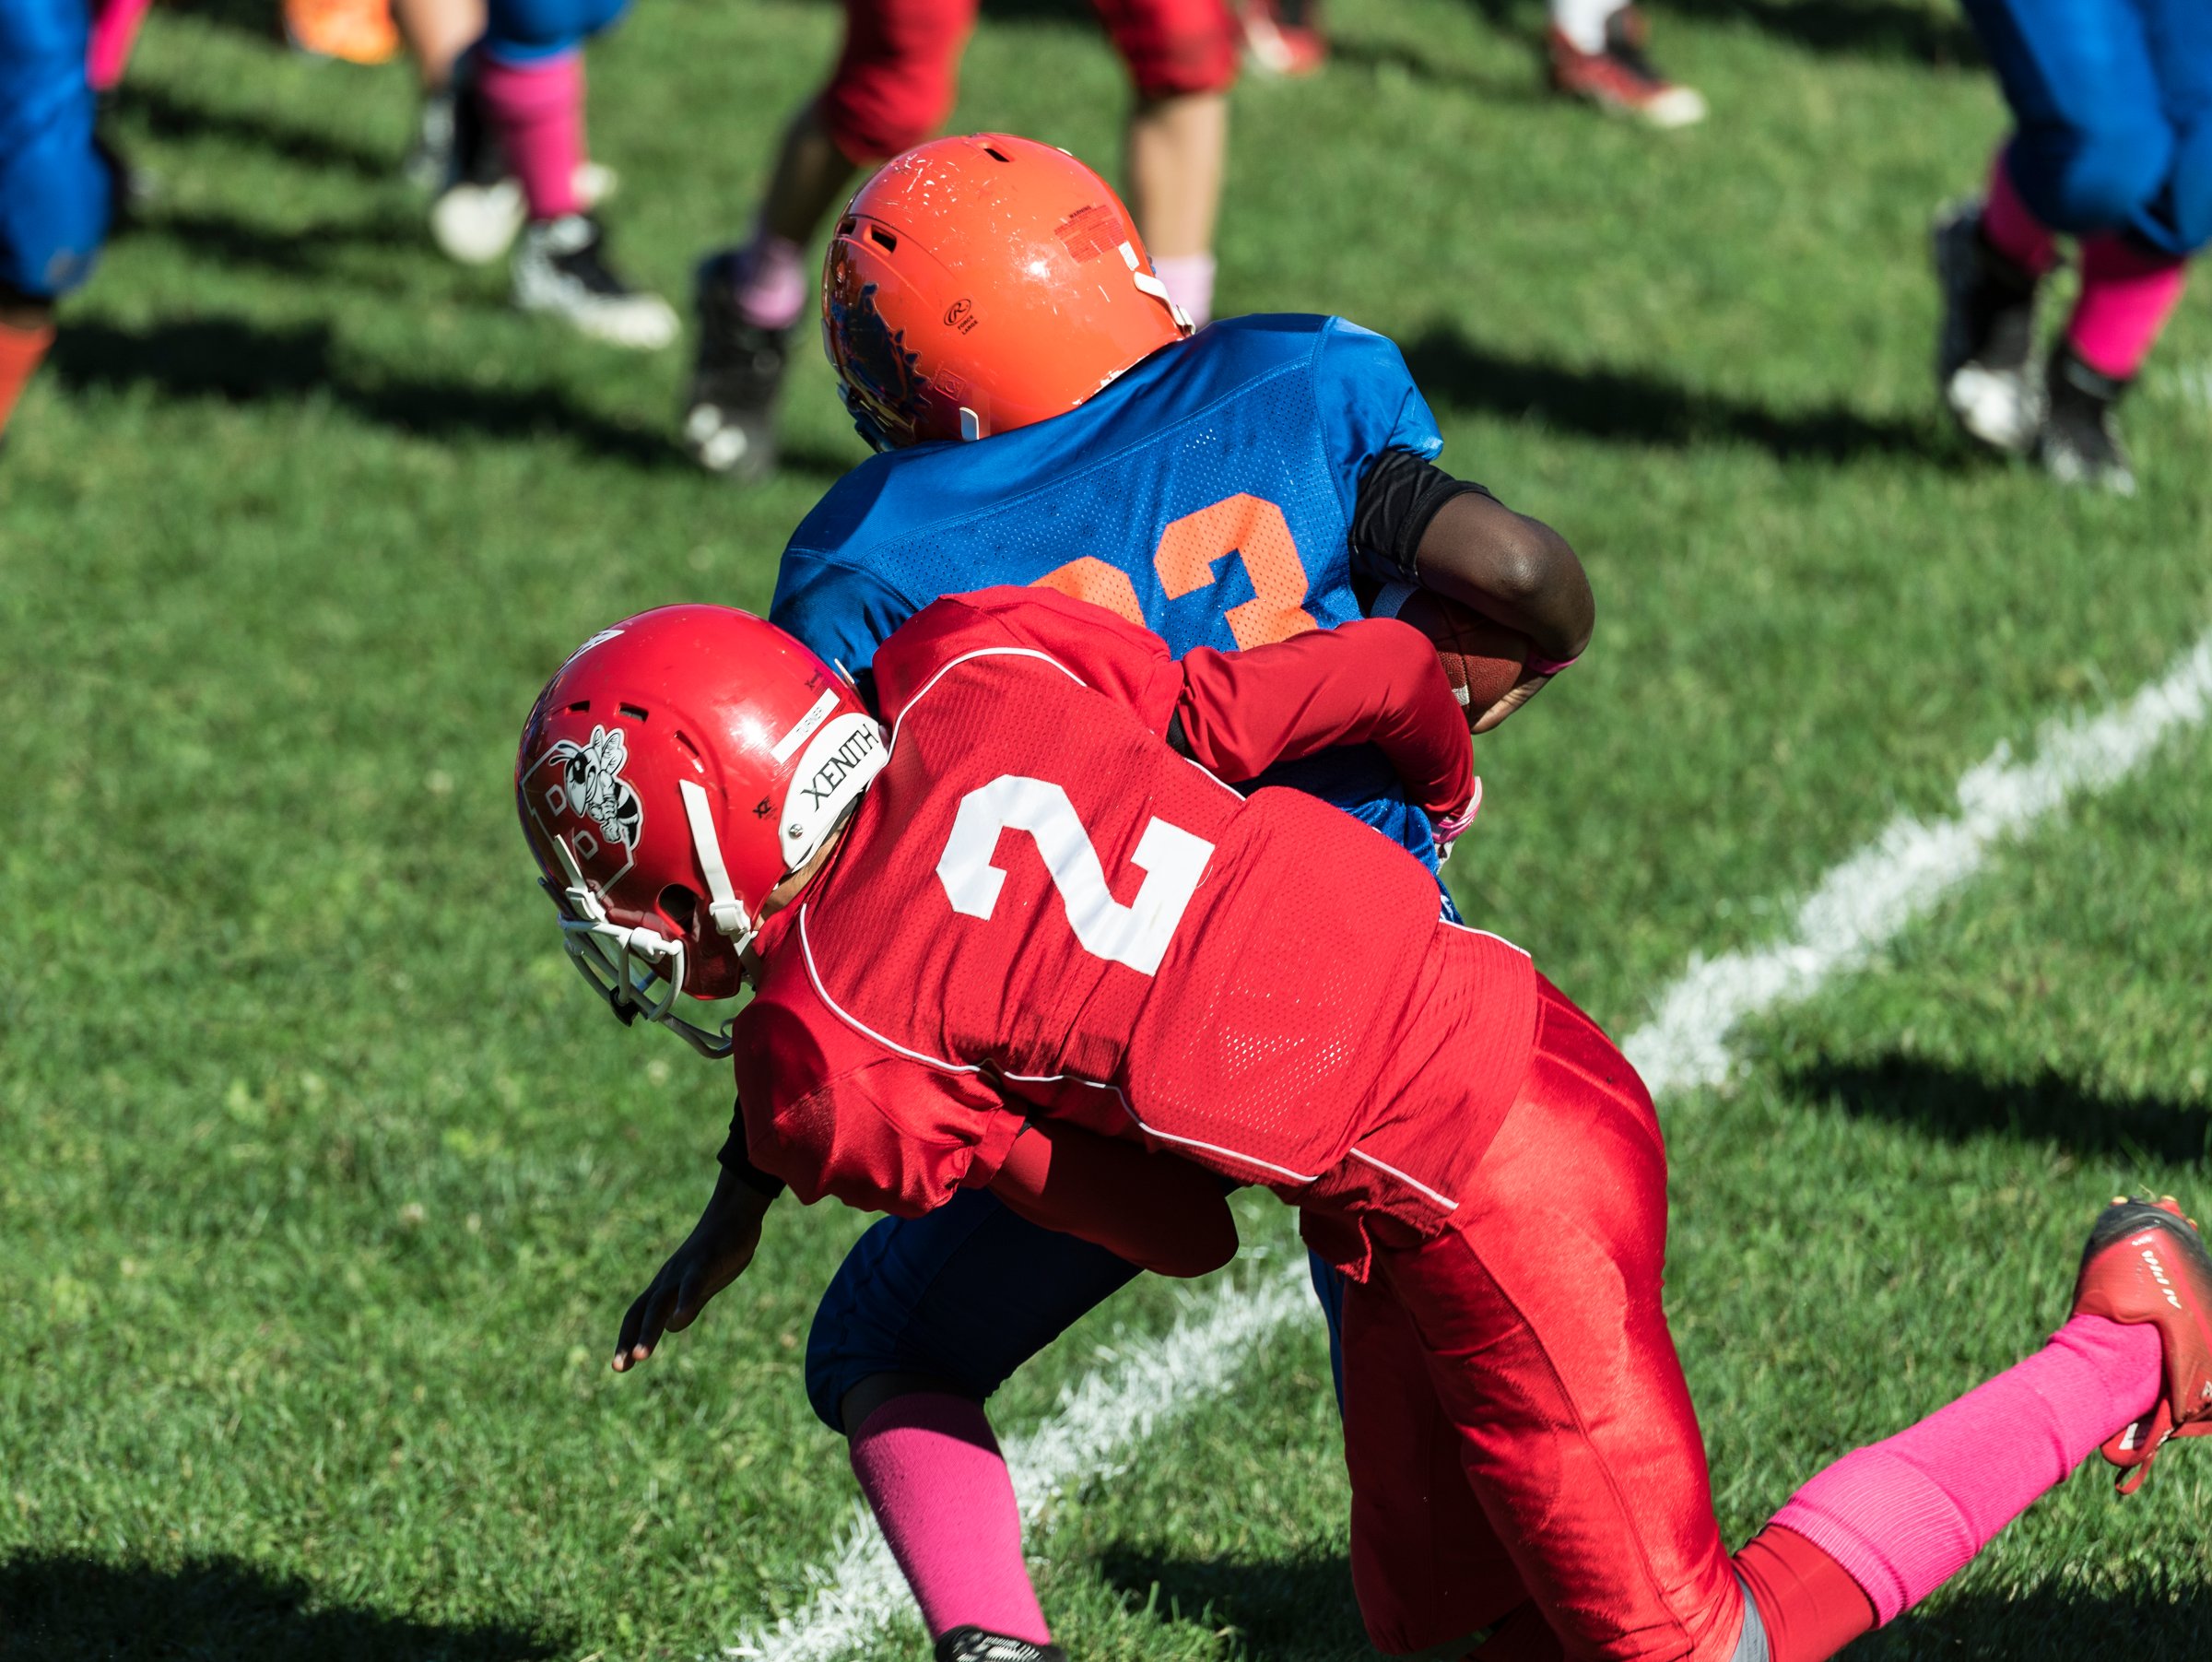 Making a tackle during a Pop Warner football game